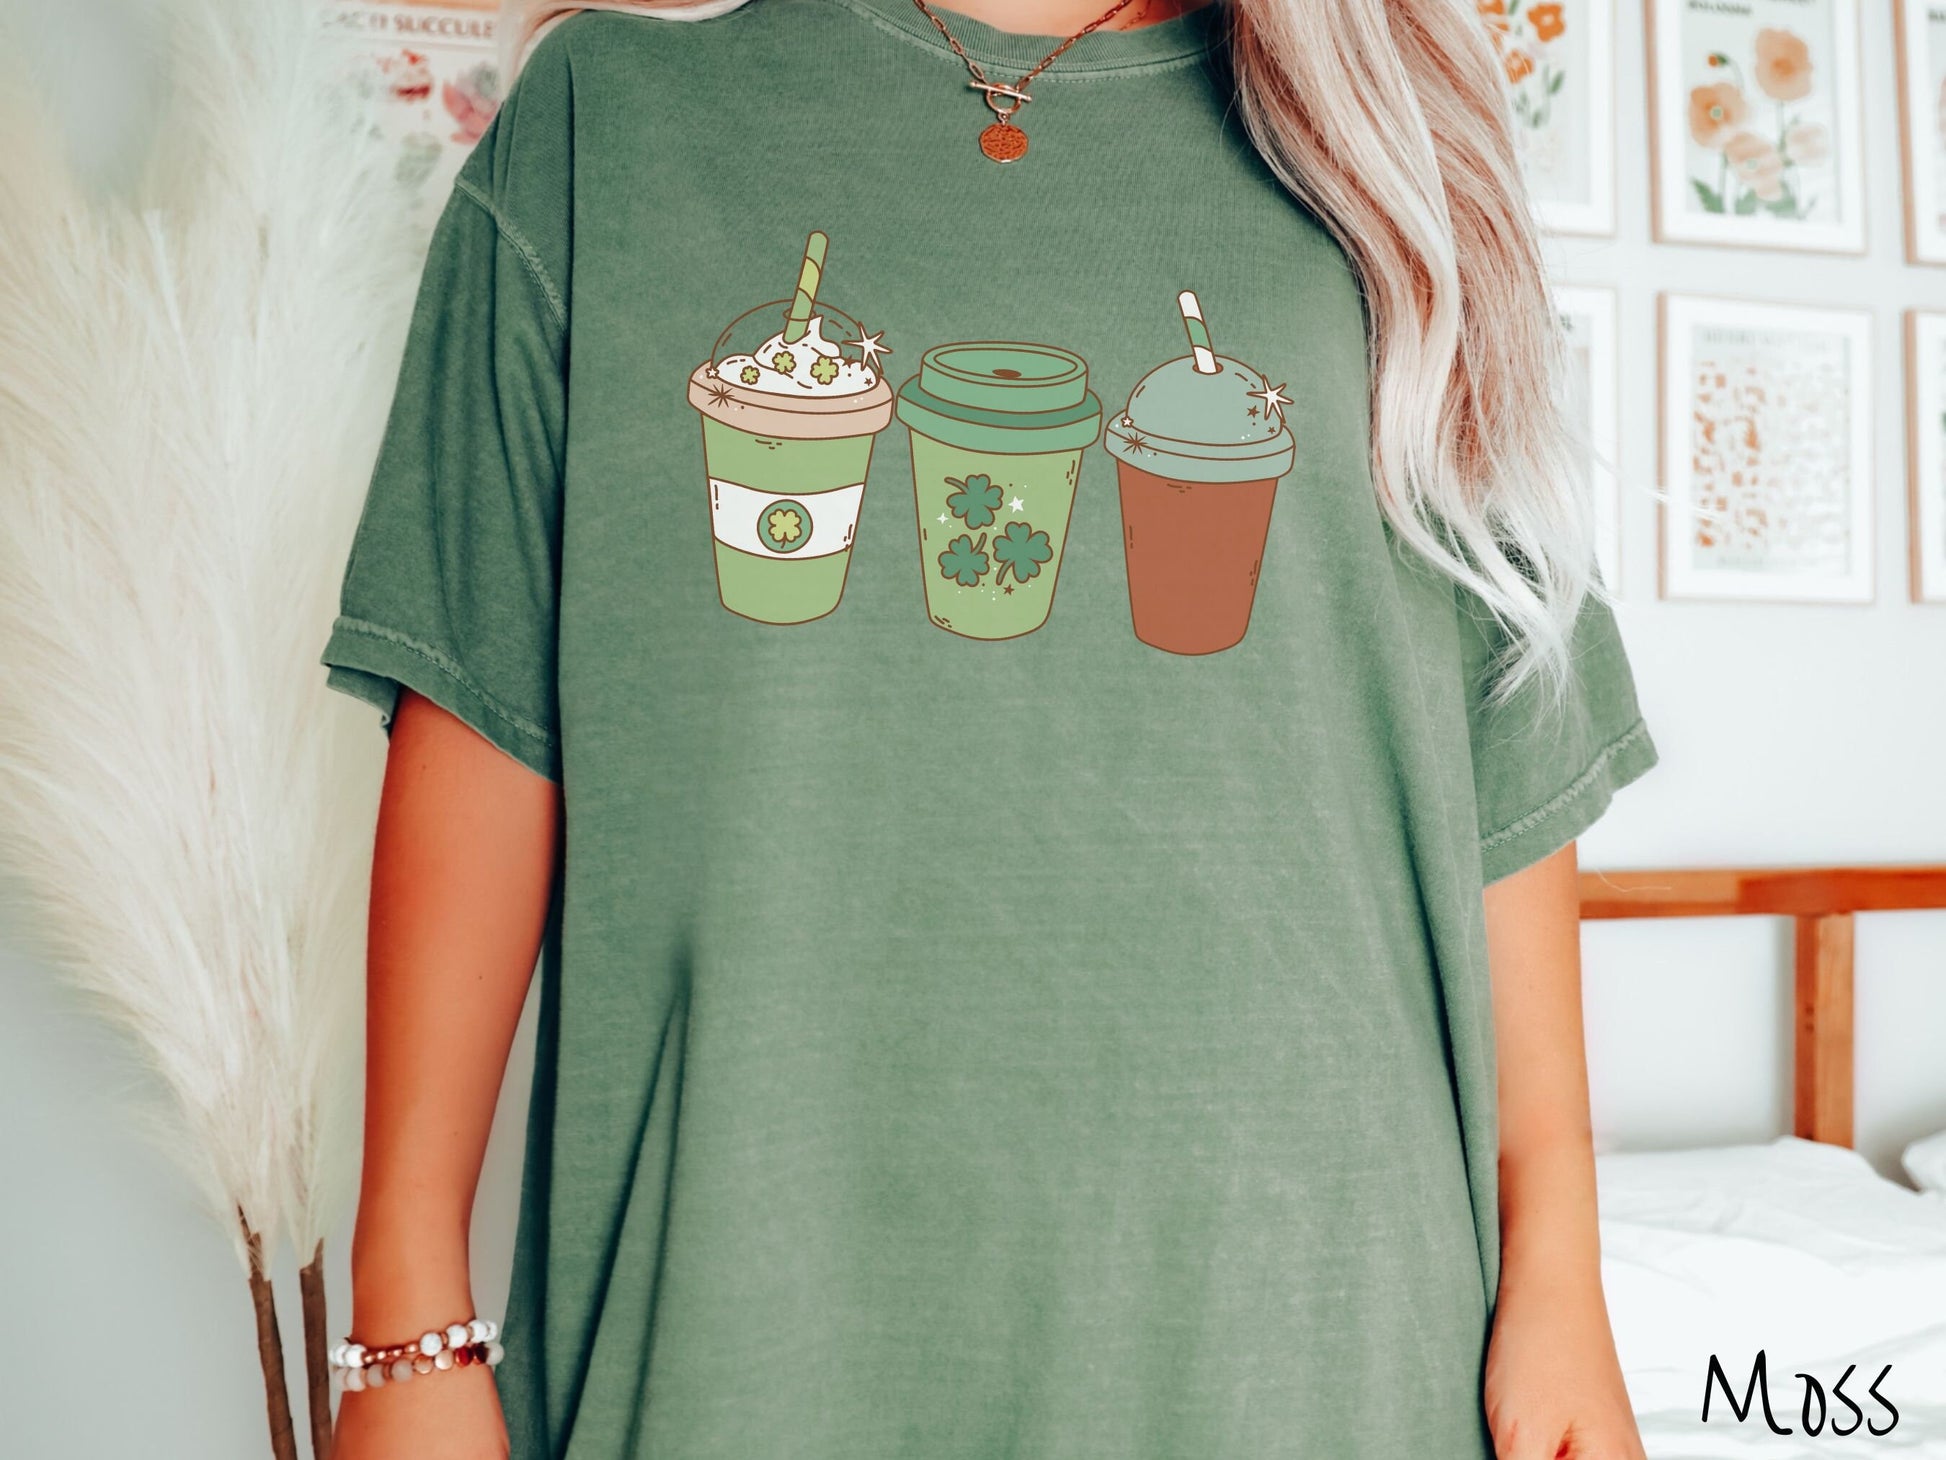 A woman wearing a vintage, moss colored shirt with three coffee cups, one is white and green with a clear lid showing whipped cream topping with green clover sprinkles, another green cup with green clovers, and the third is brown with a green lid.